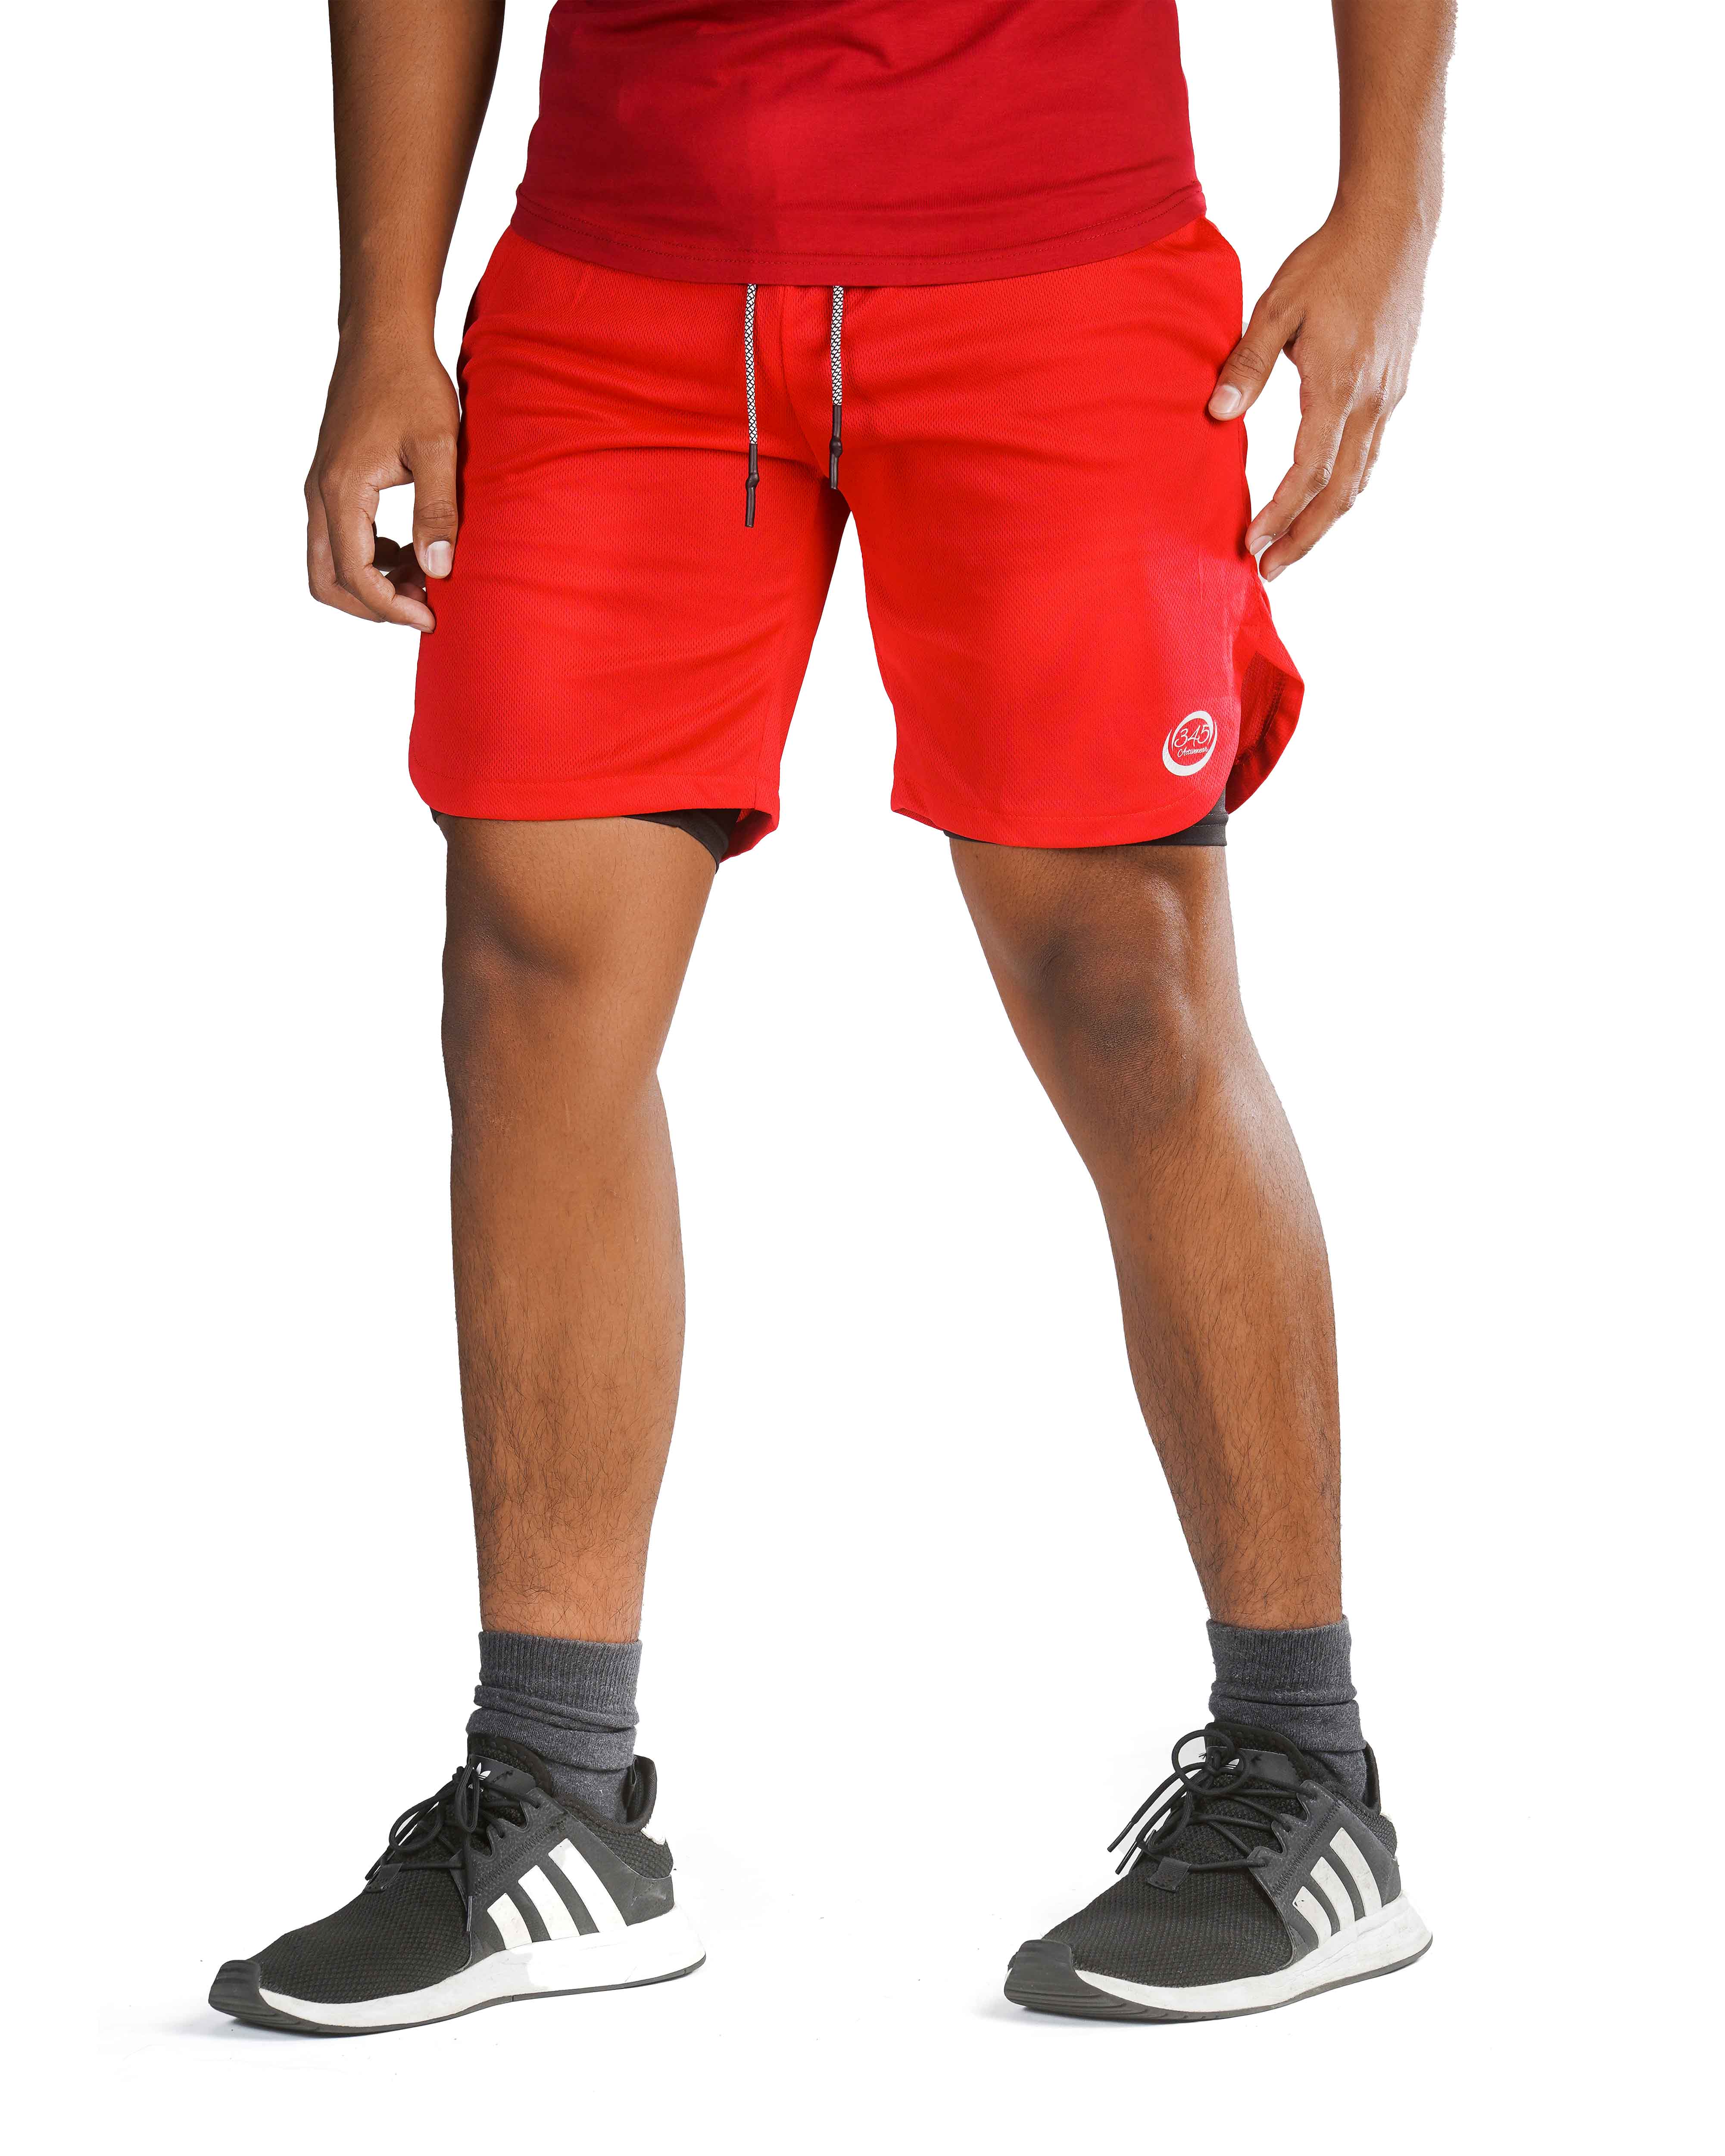 MEN'S SPORT SHORTS 2 IN ONE WITH PHONE POCKET (Run a size smaller)